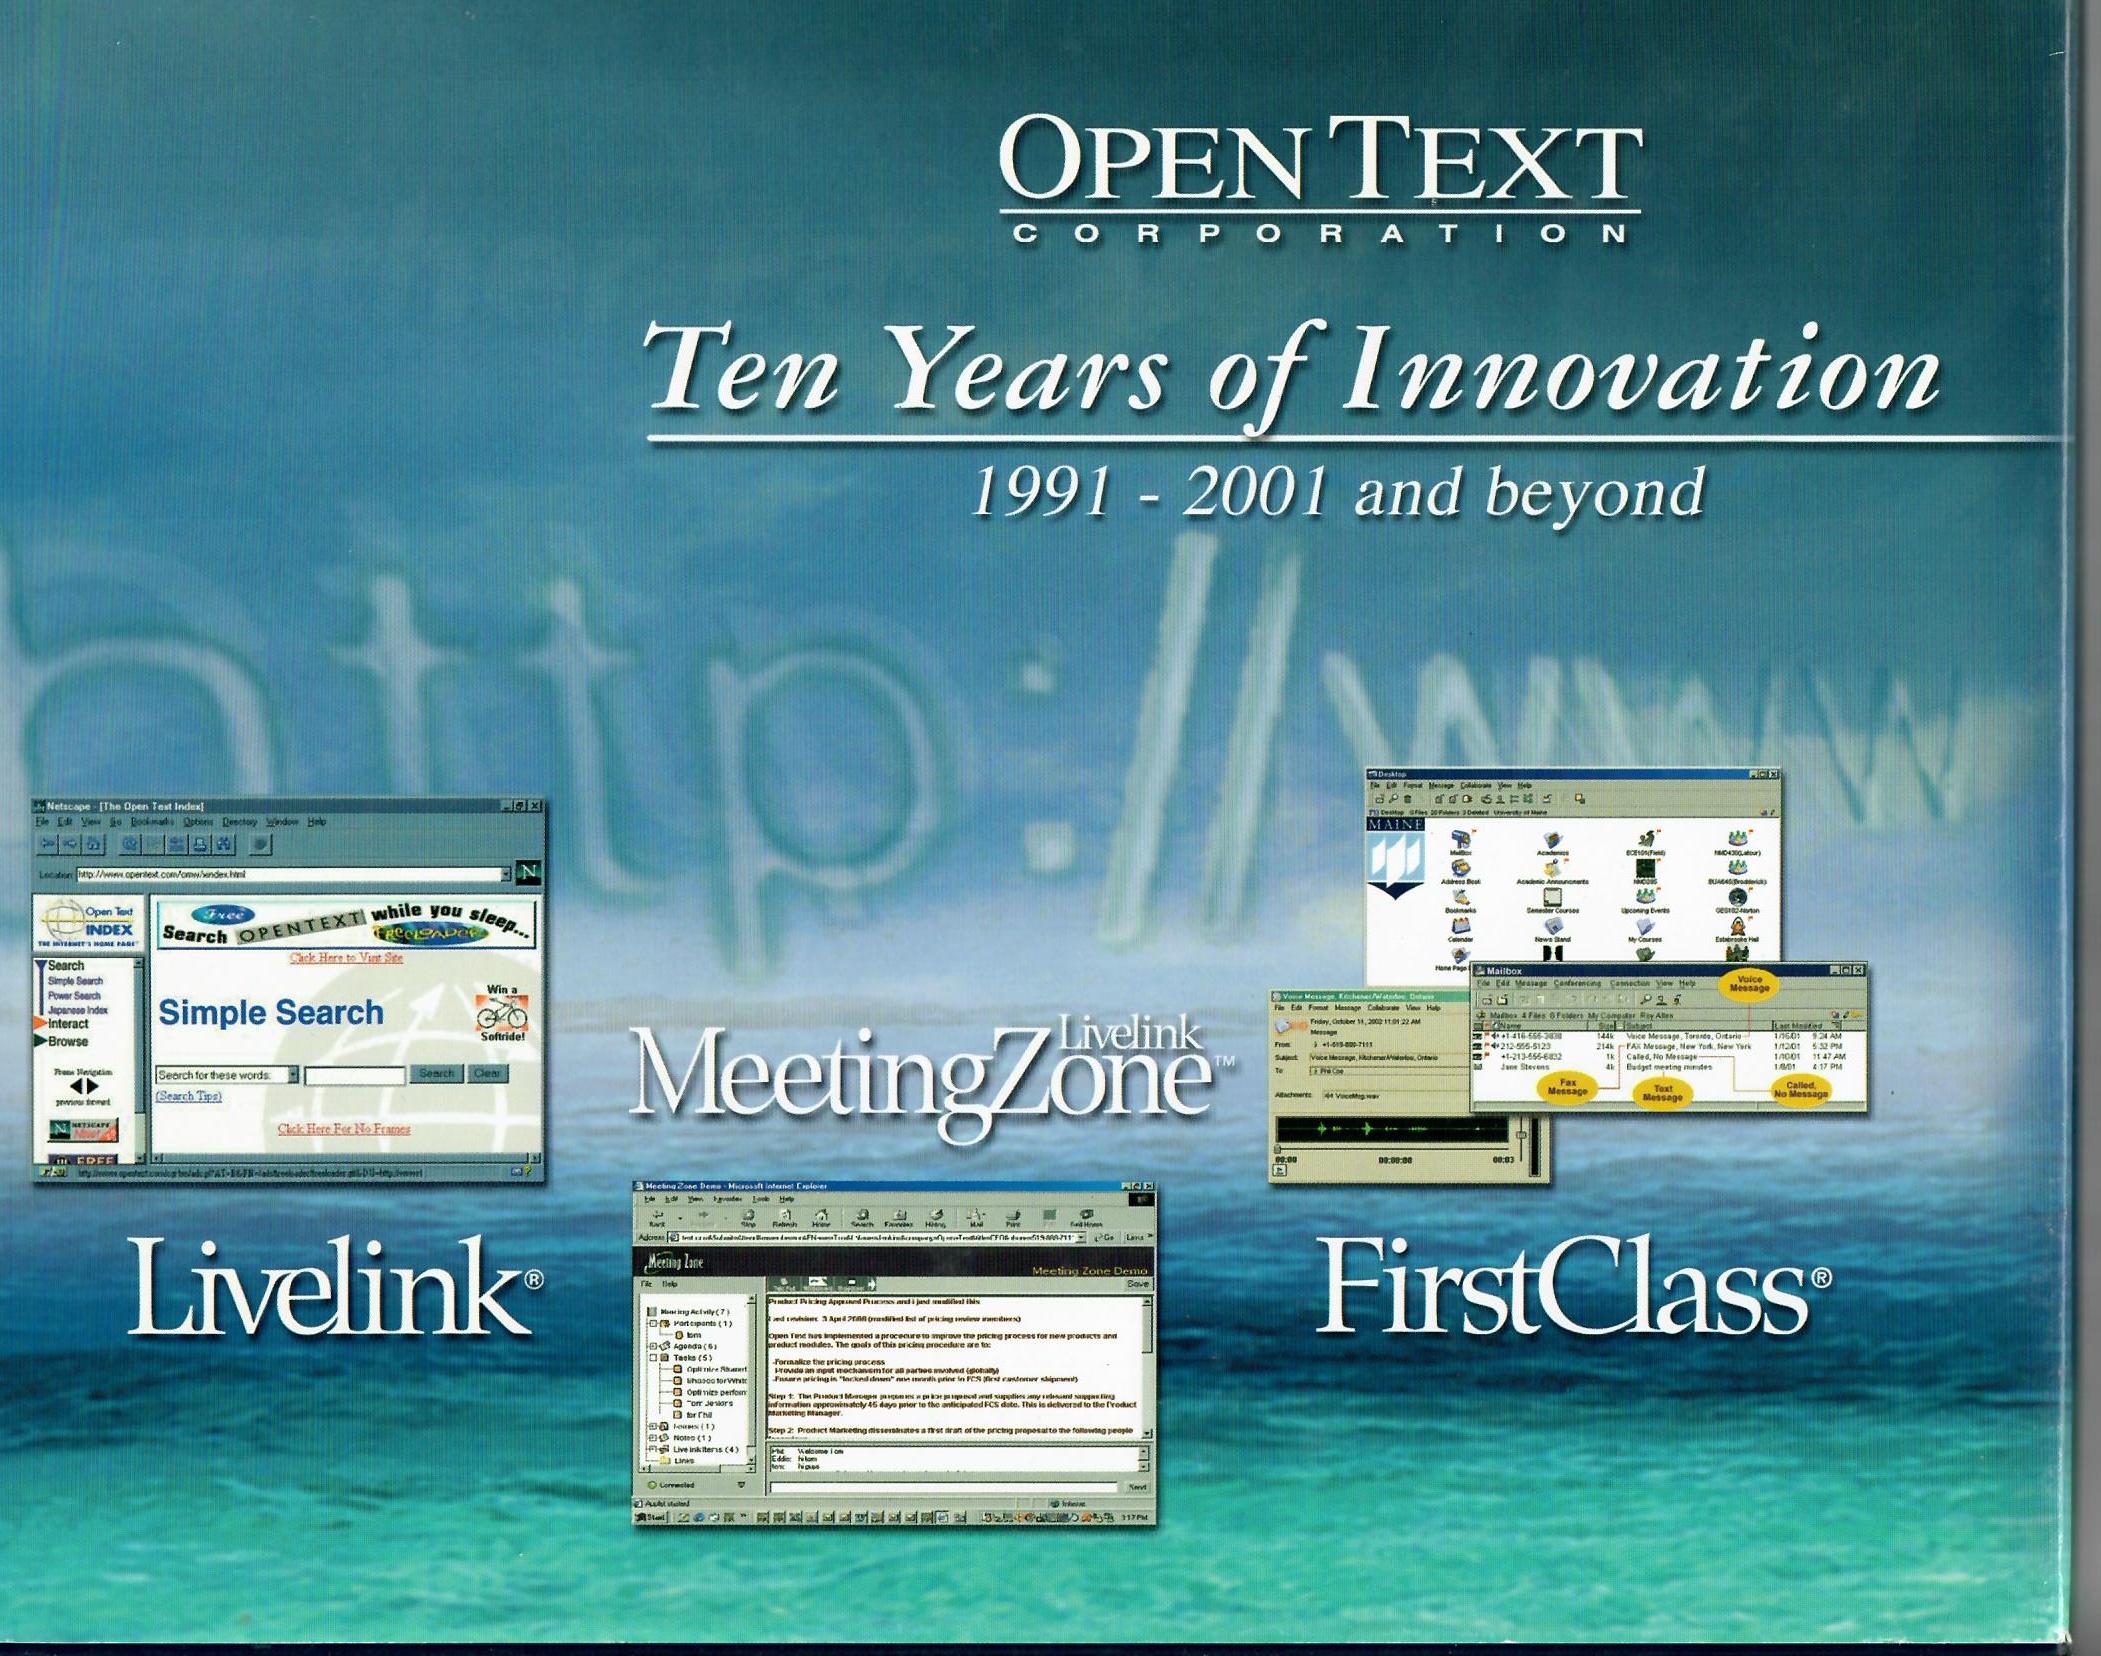 Ten Years of Innovation: 1991-2001 and beyond